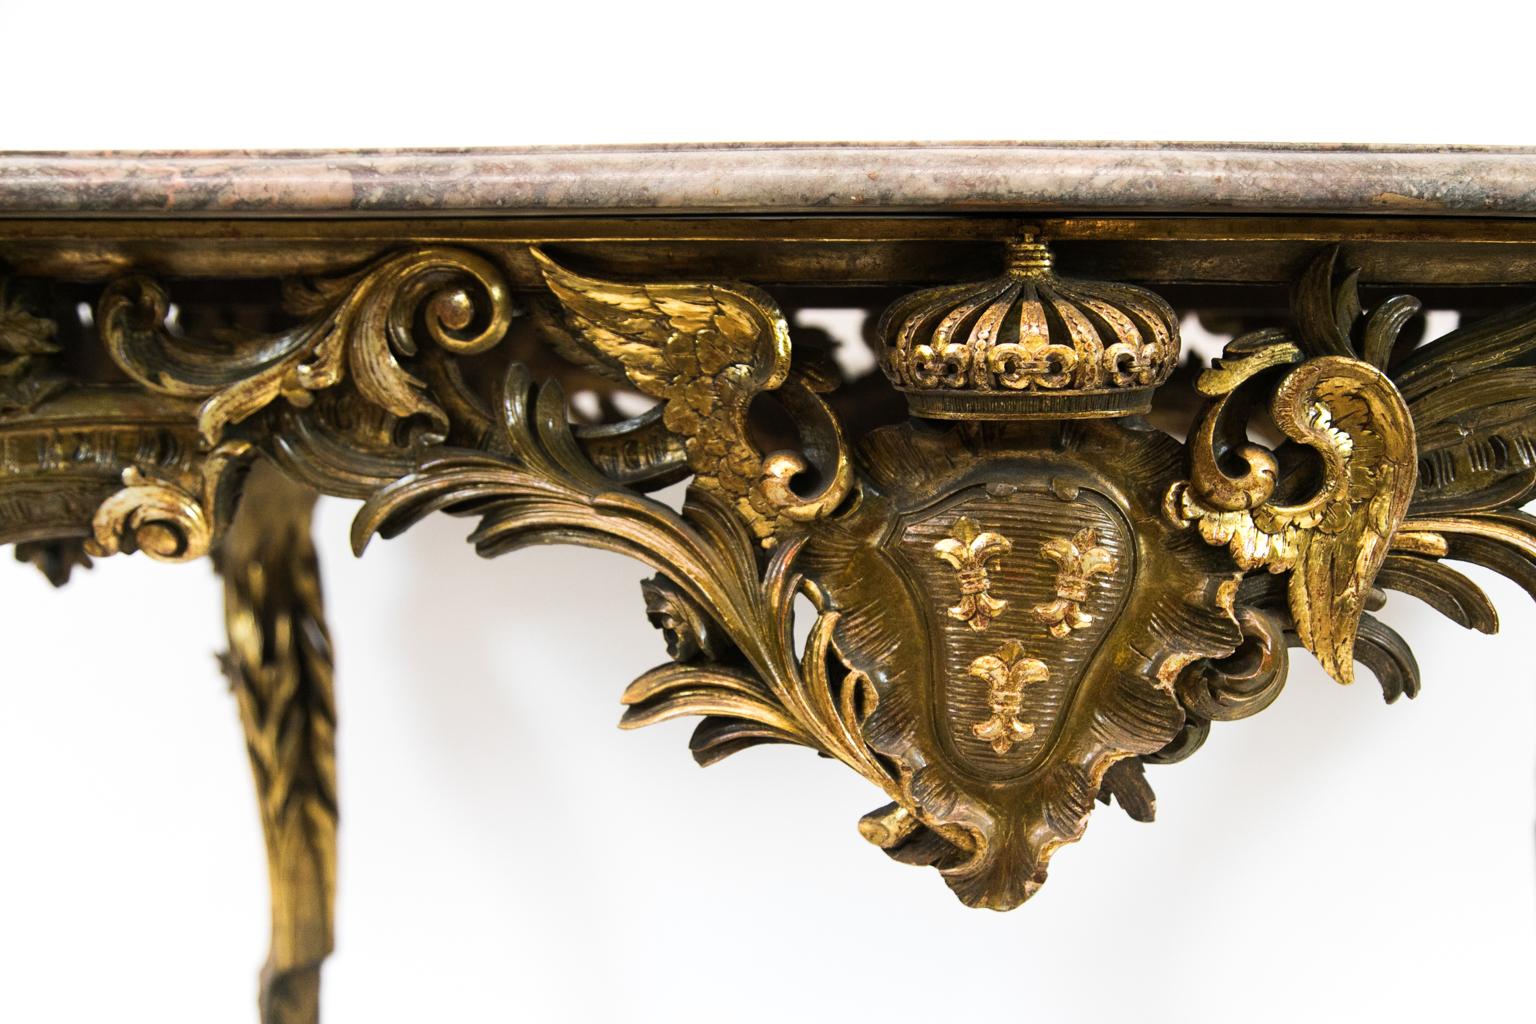 Italian gilt marble top center table has a serpentine molded edge on all four sides with ovolo corners. The carved cabriole legs have three dimensional open work leaf carvings. The apron has a carved gilt crown atop a cartouche with three carved